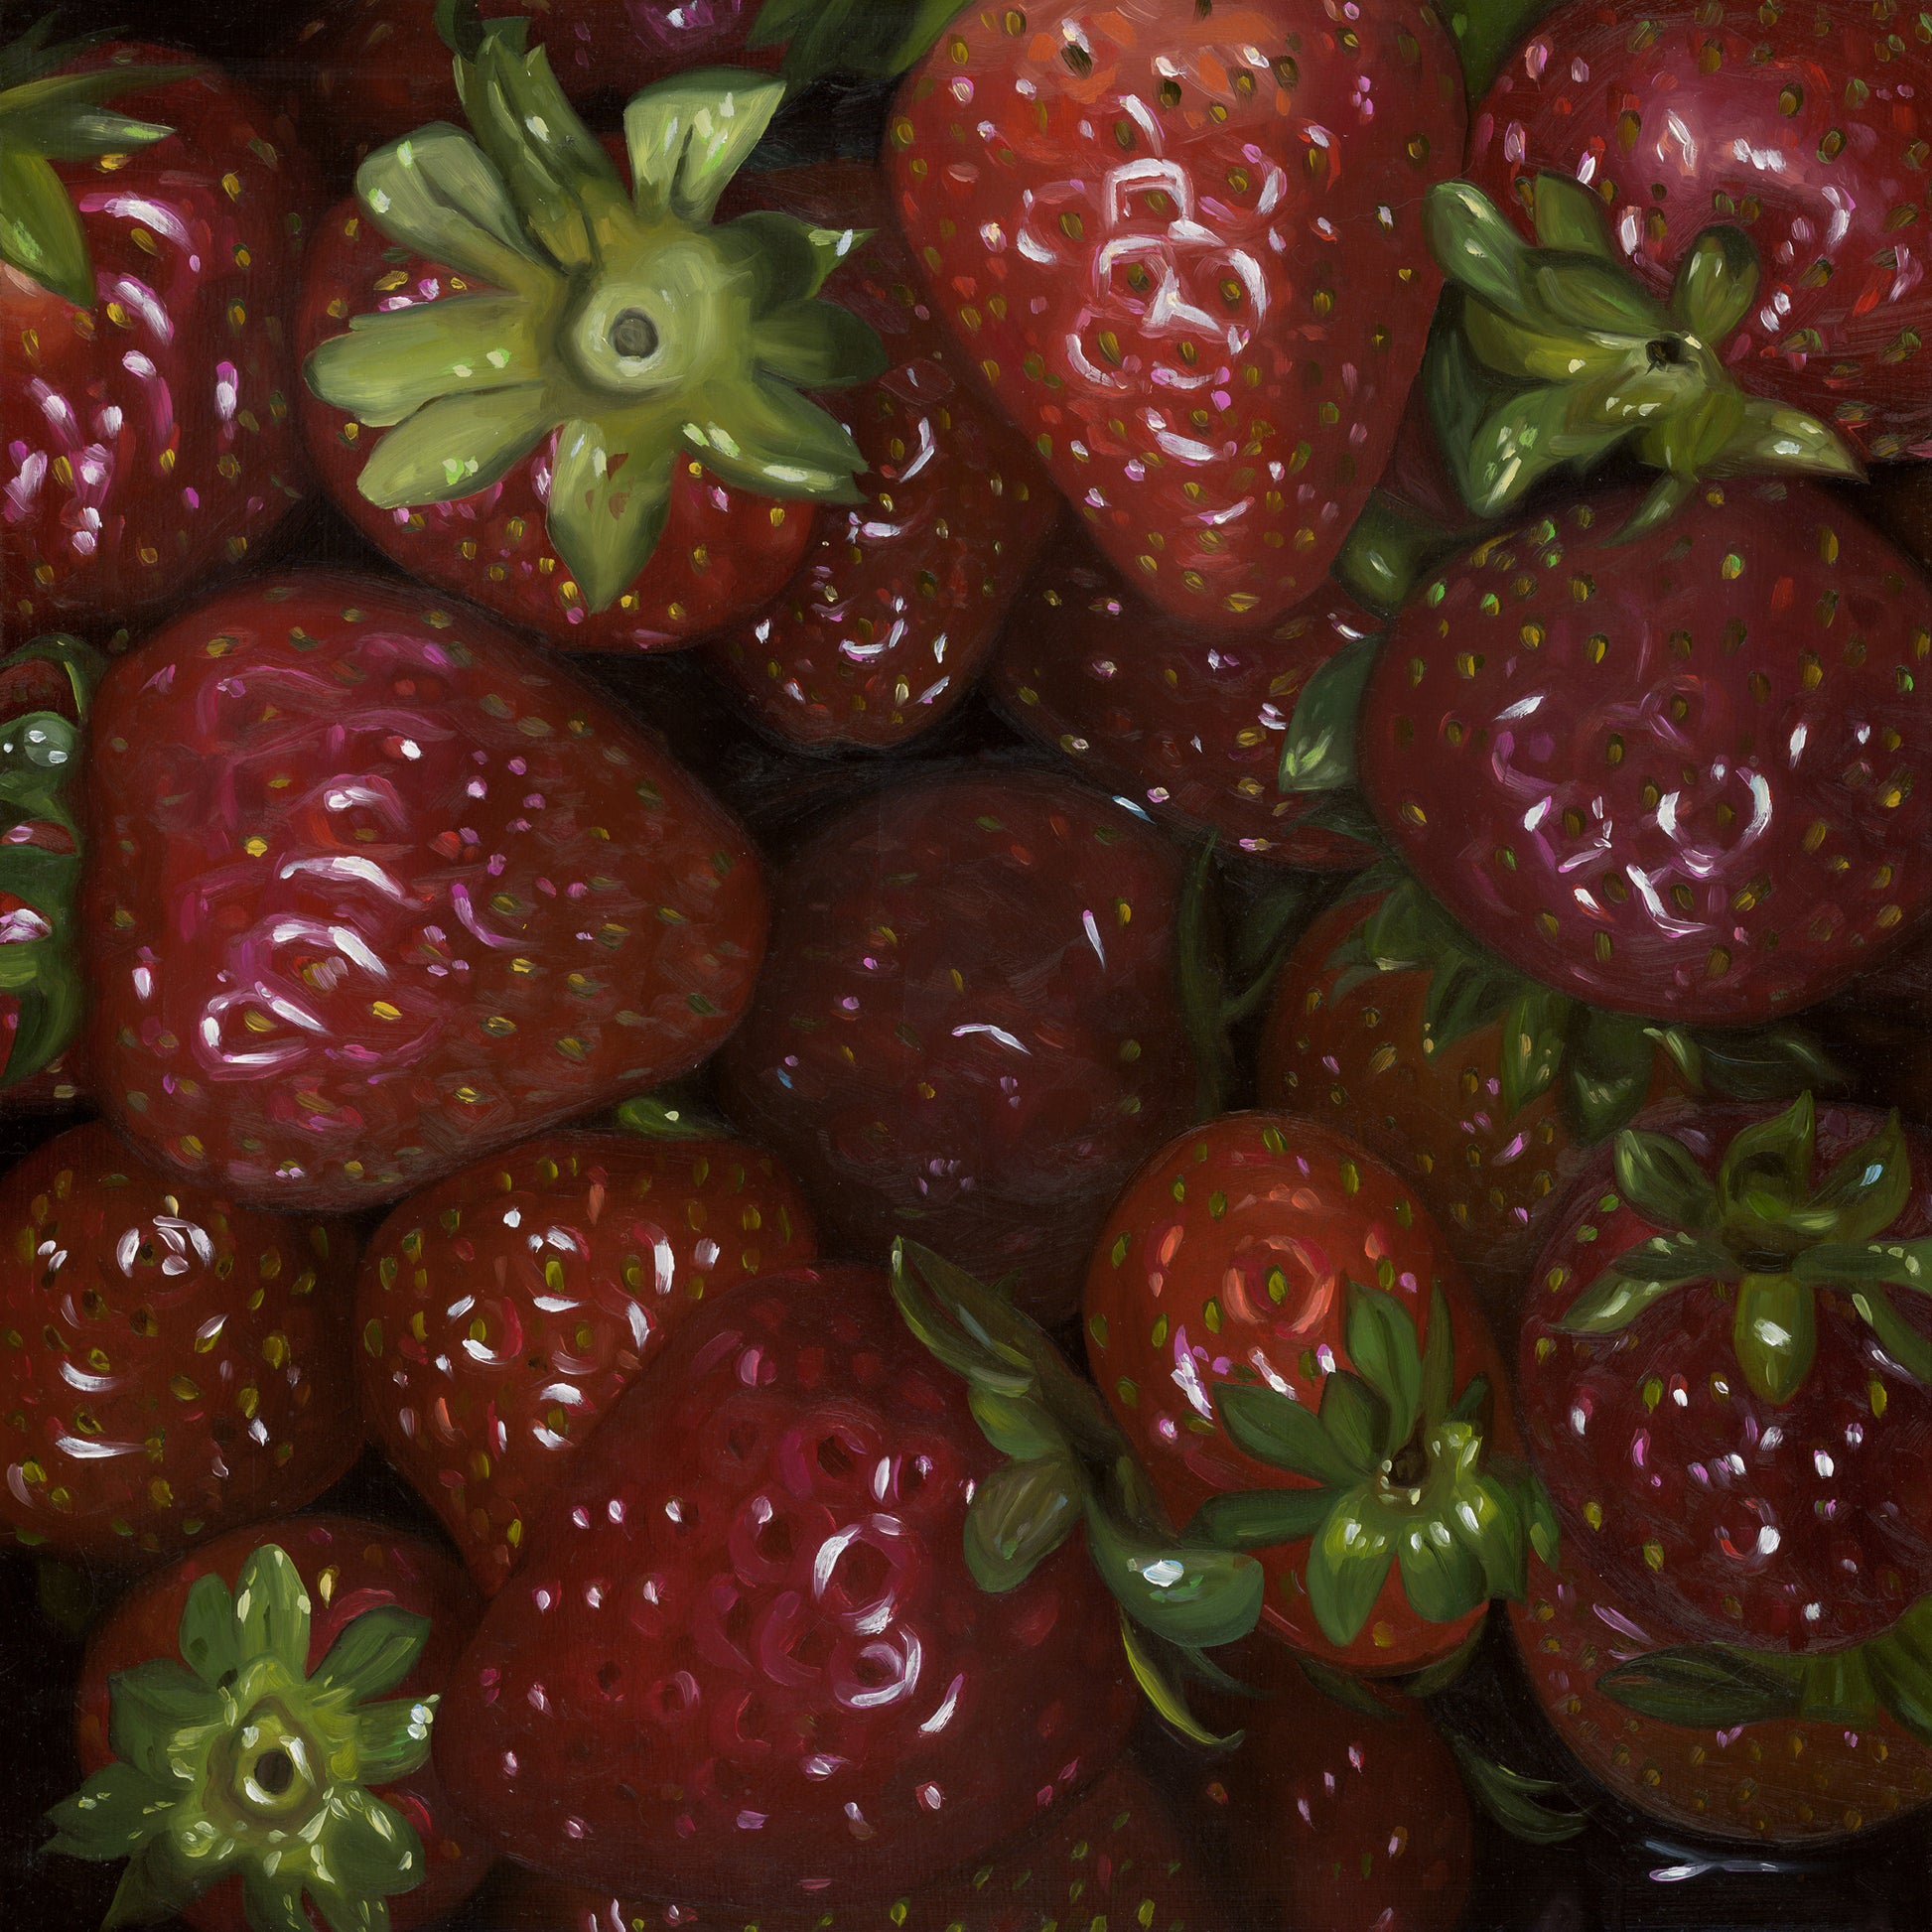 The original painting “Strawberries" by Hannah Kilby from Hannah Michelle Studios.